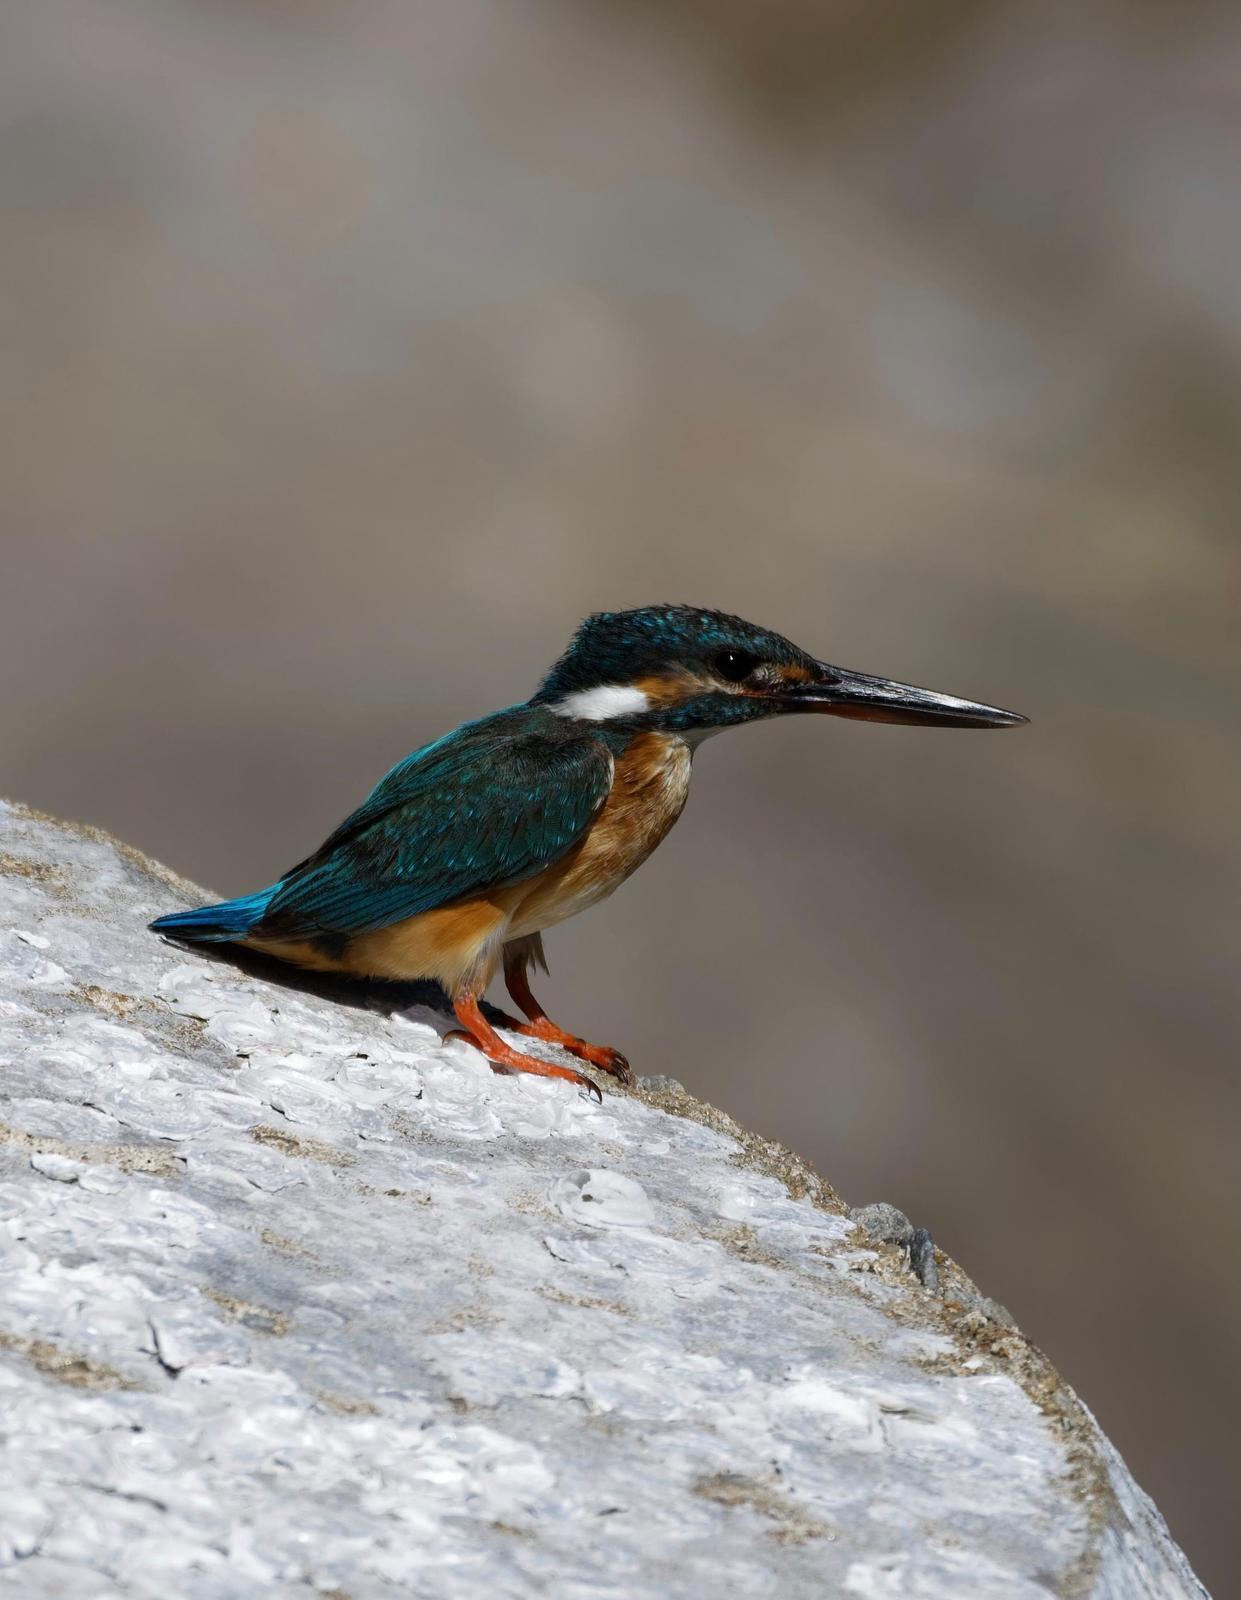 Common Kingfisher Photo by Robert Cousins